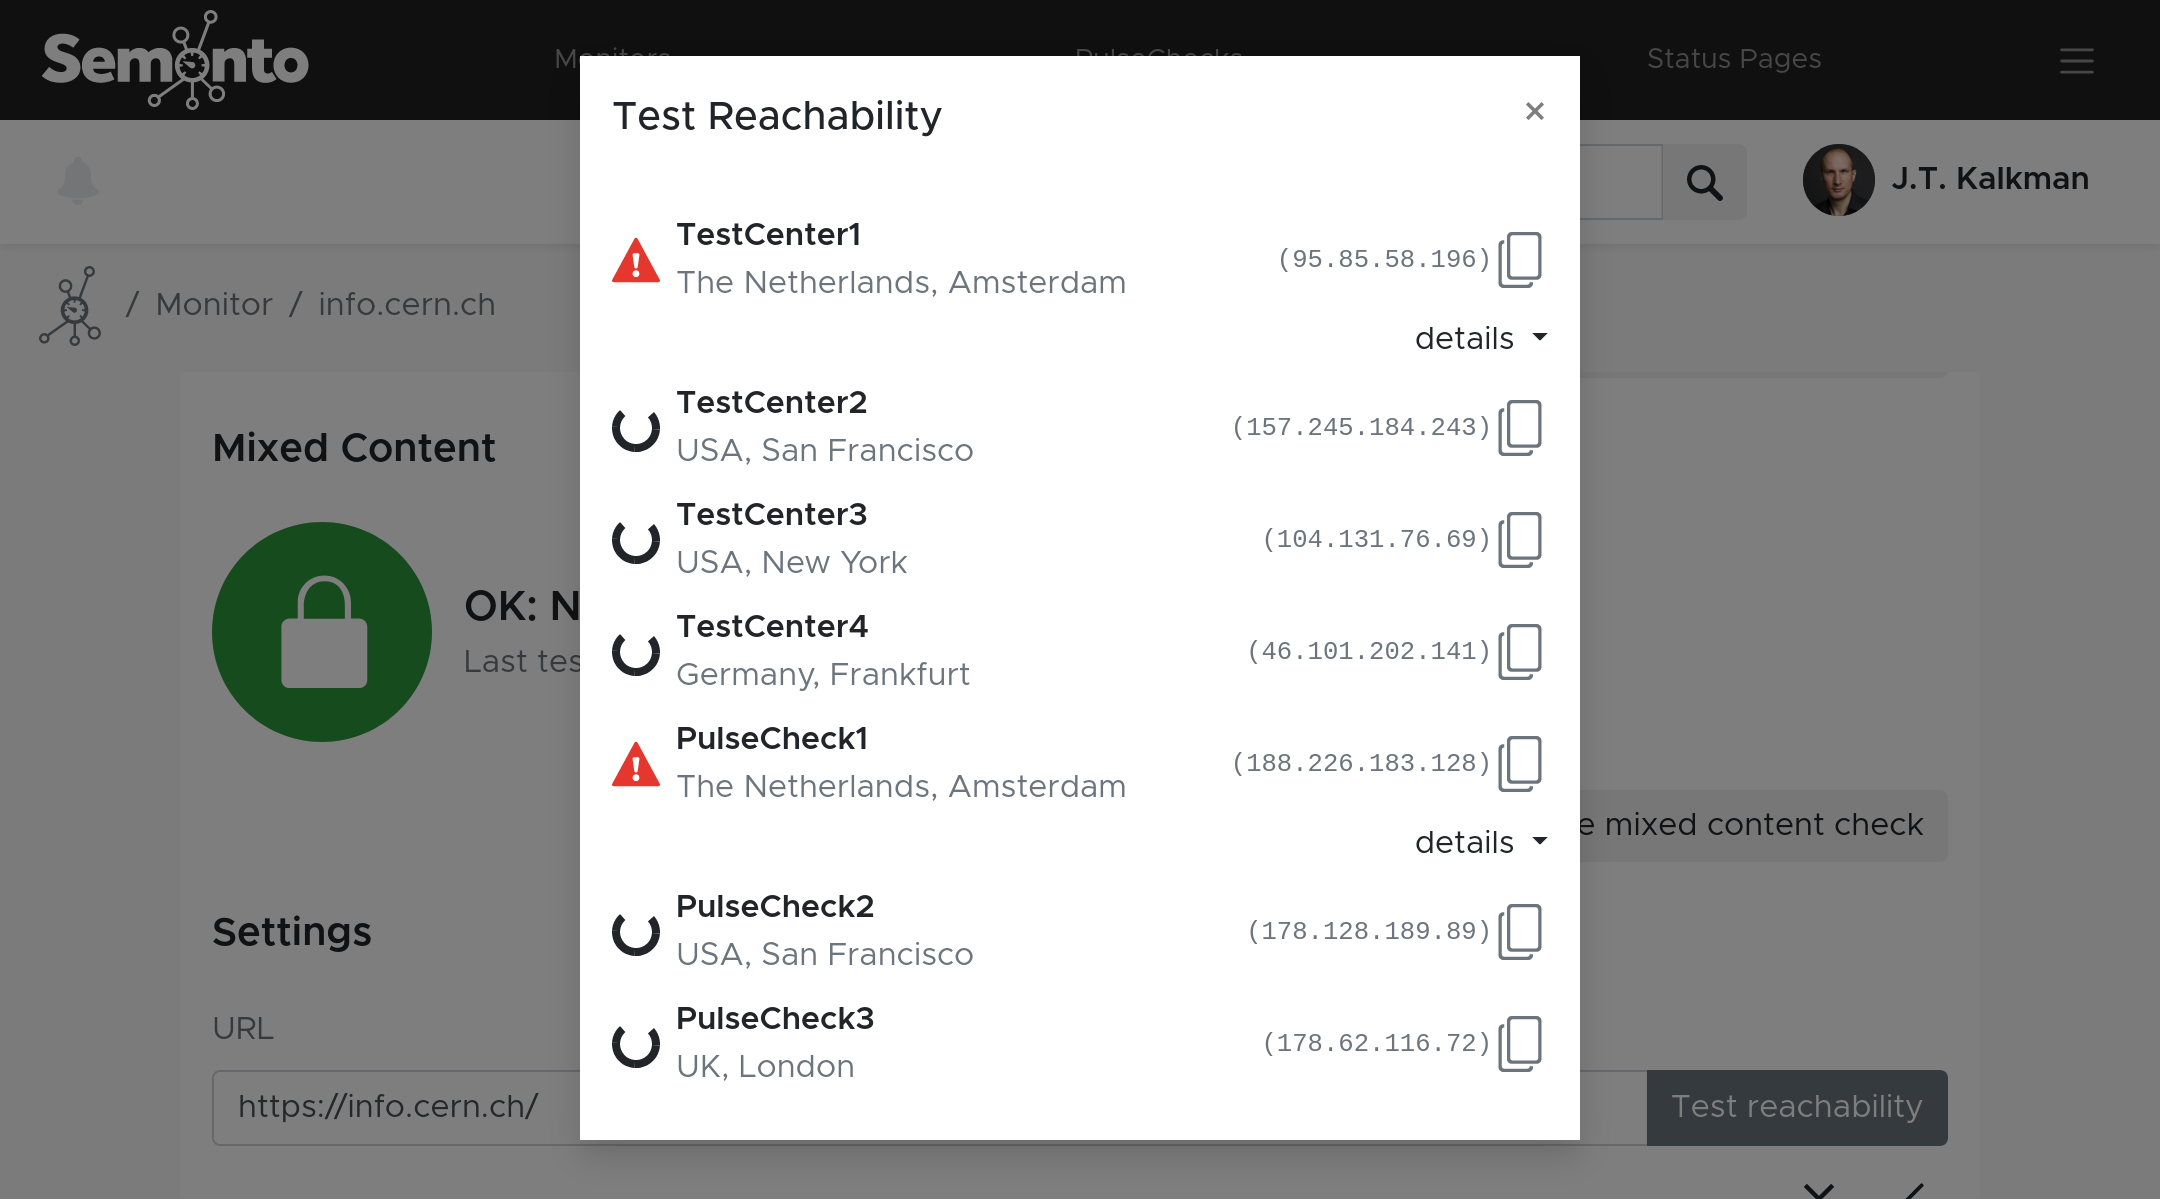 A running reachability test in Semonto